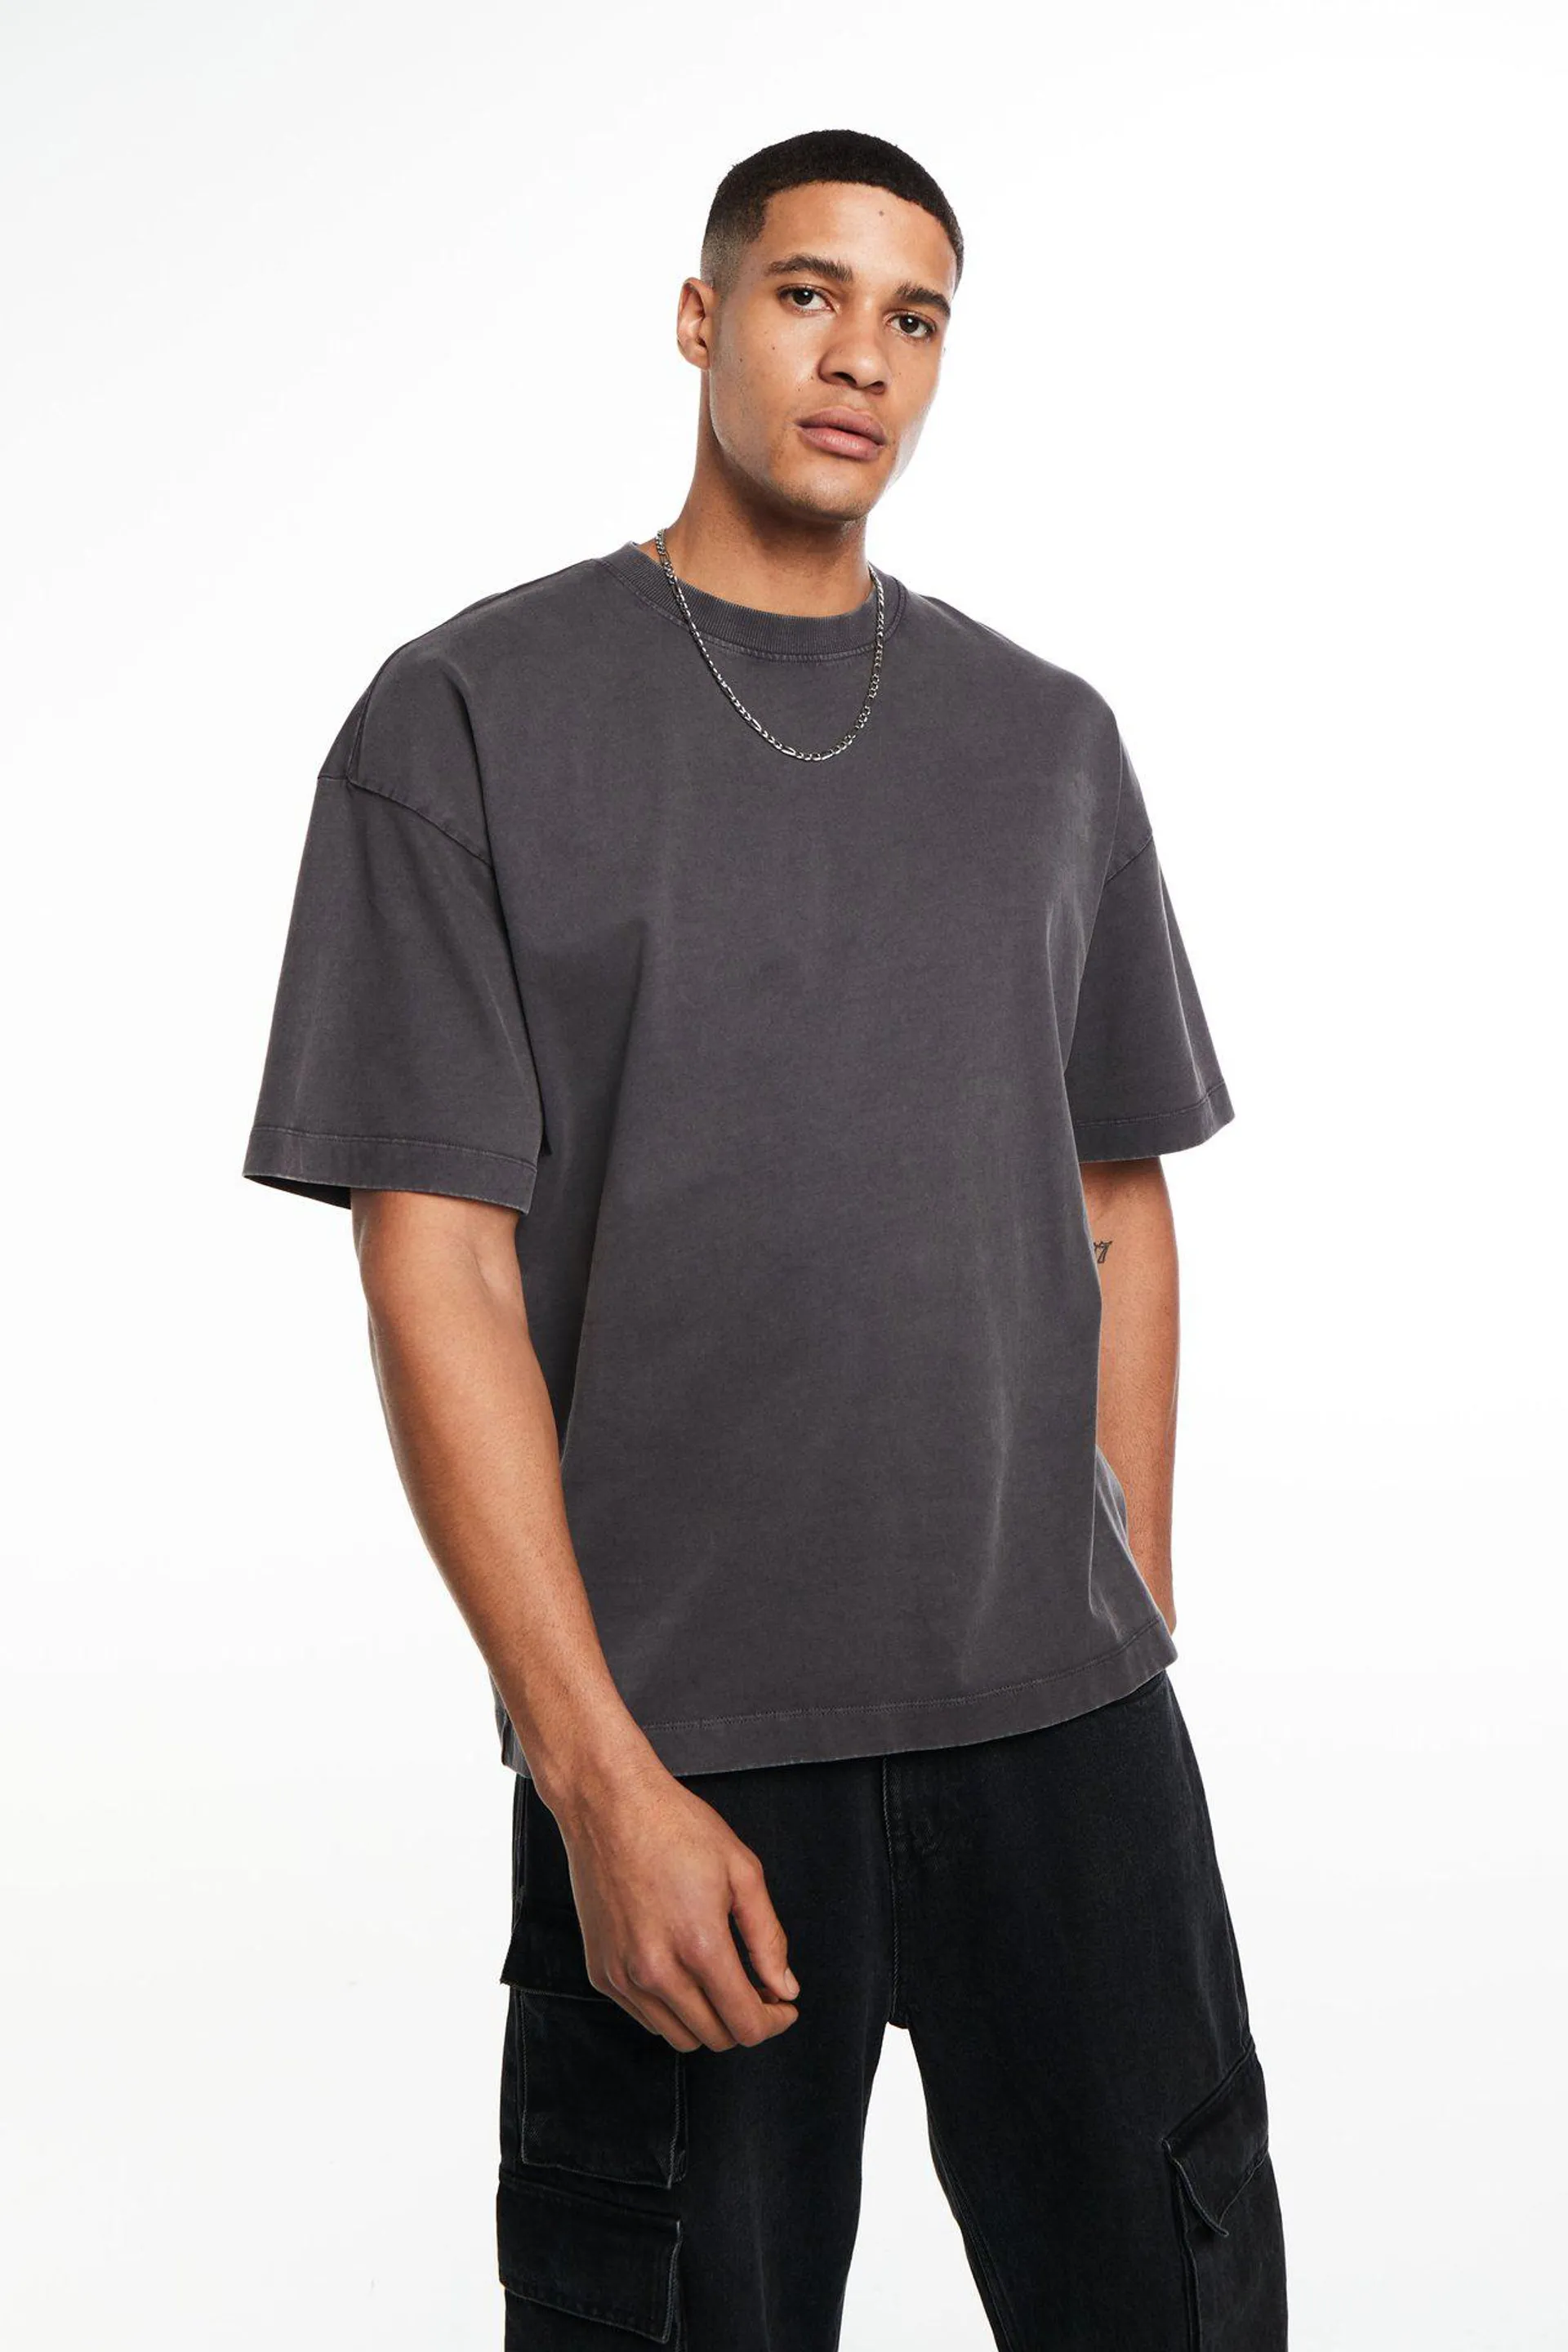 T-shirt with round neck